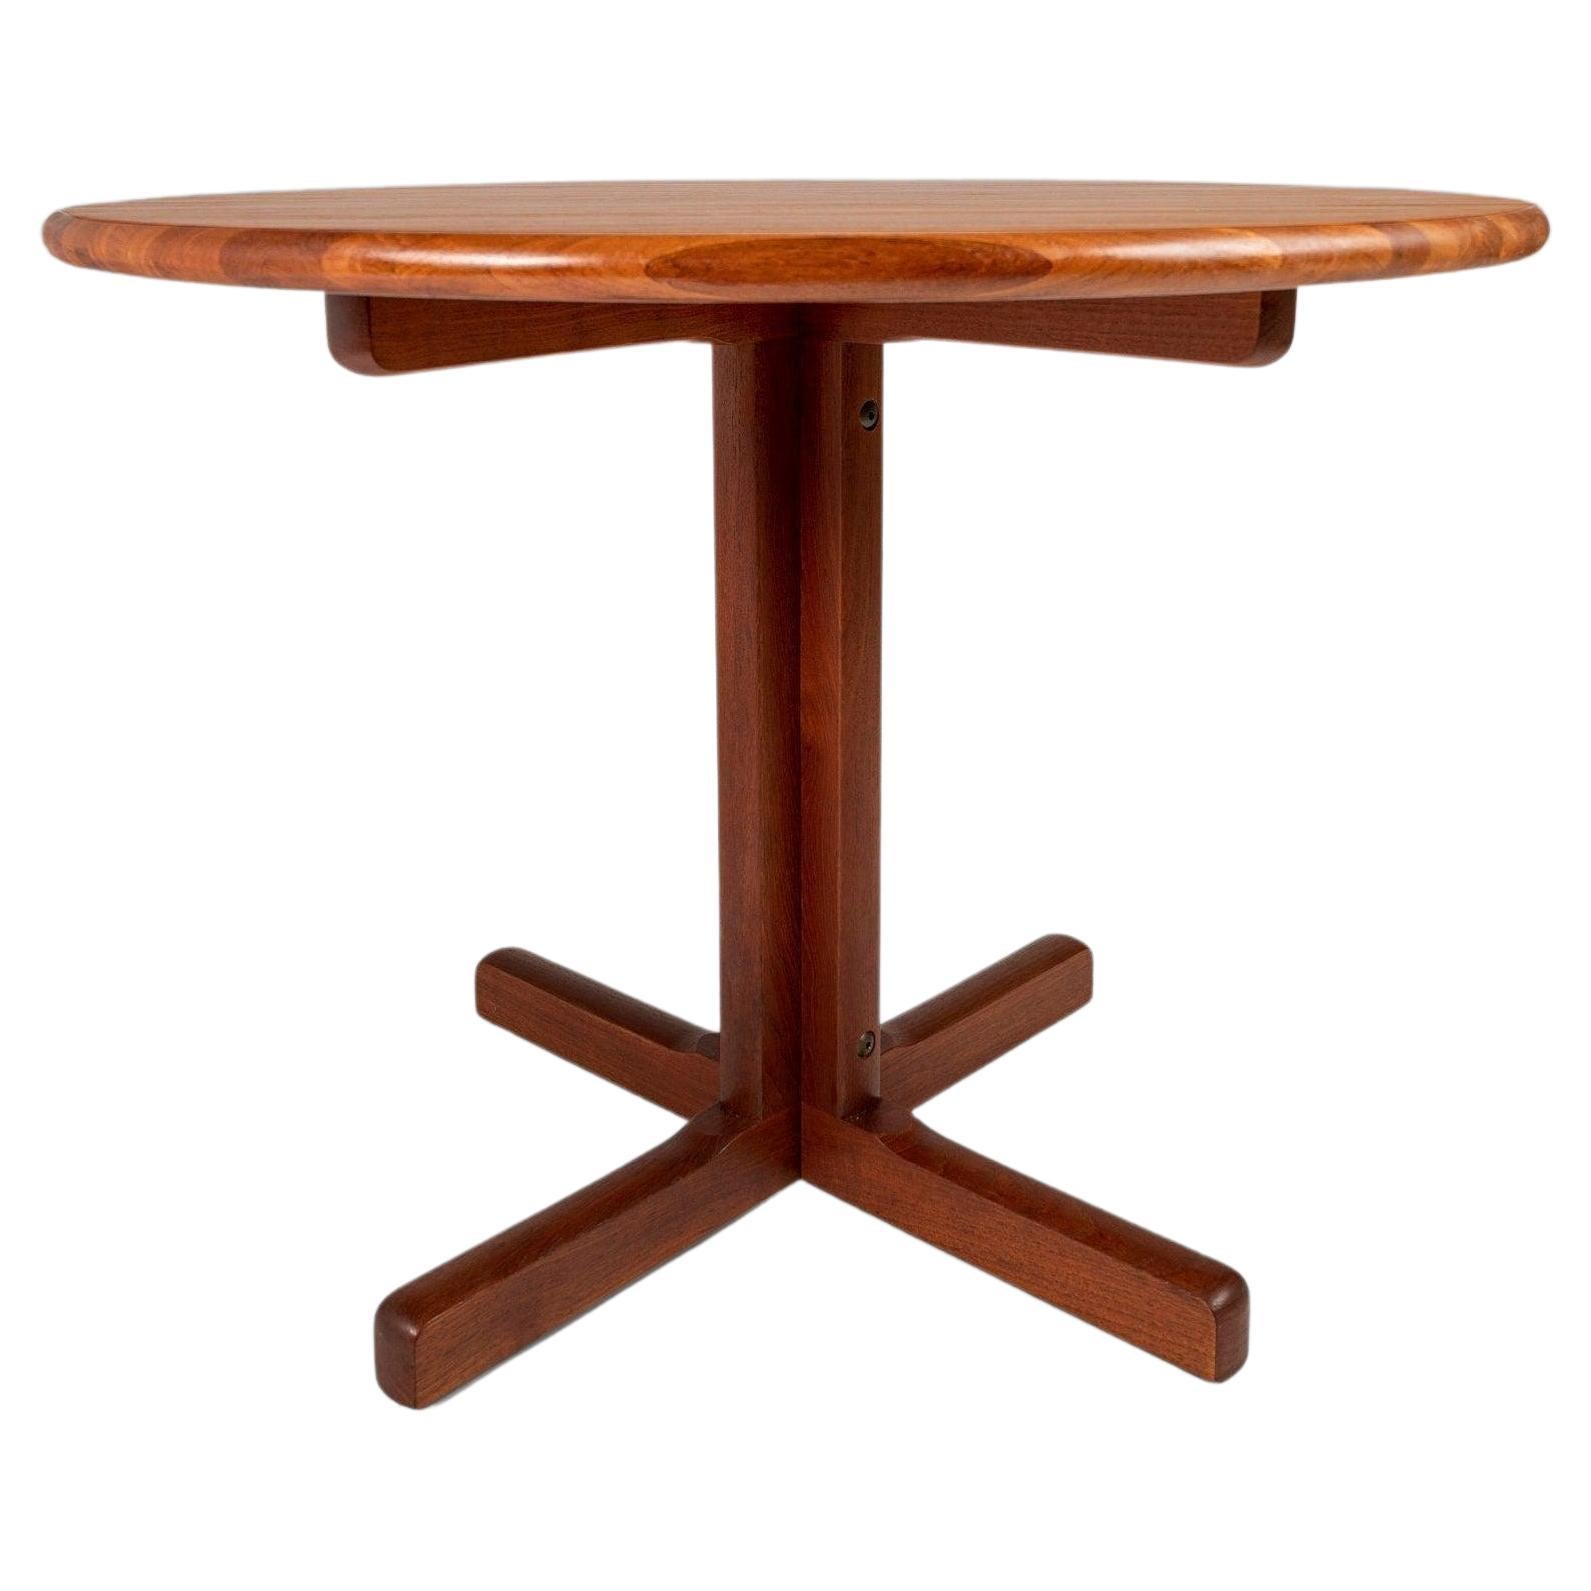 Small Round / Kitchenette Dining Table by Tarm Stole-Og in Solid Teak, Denmark